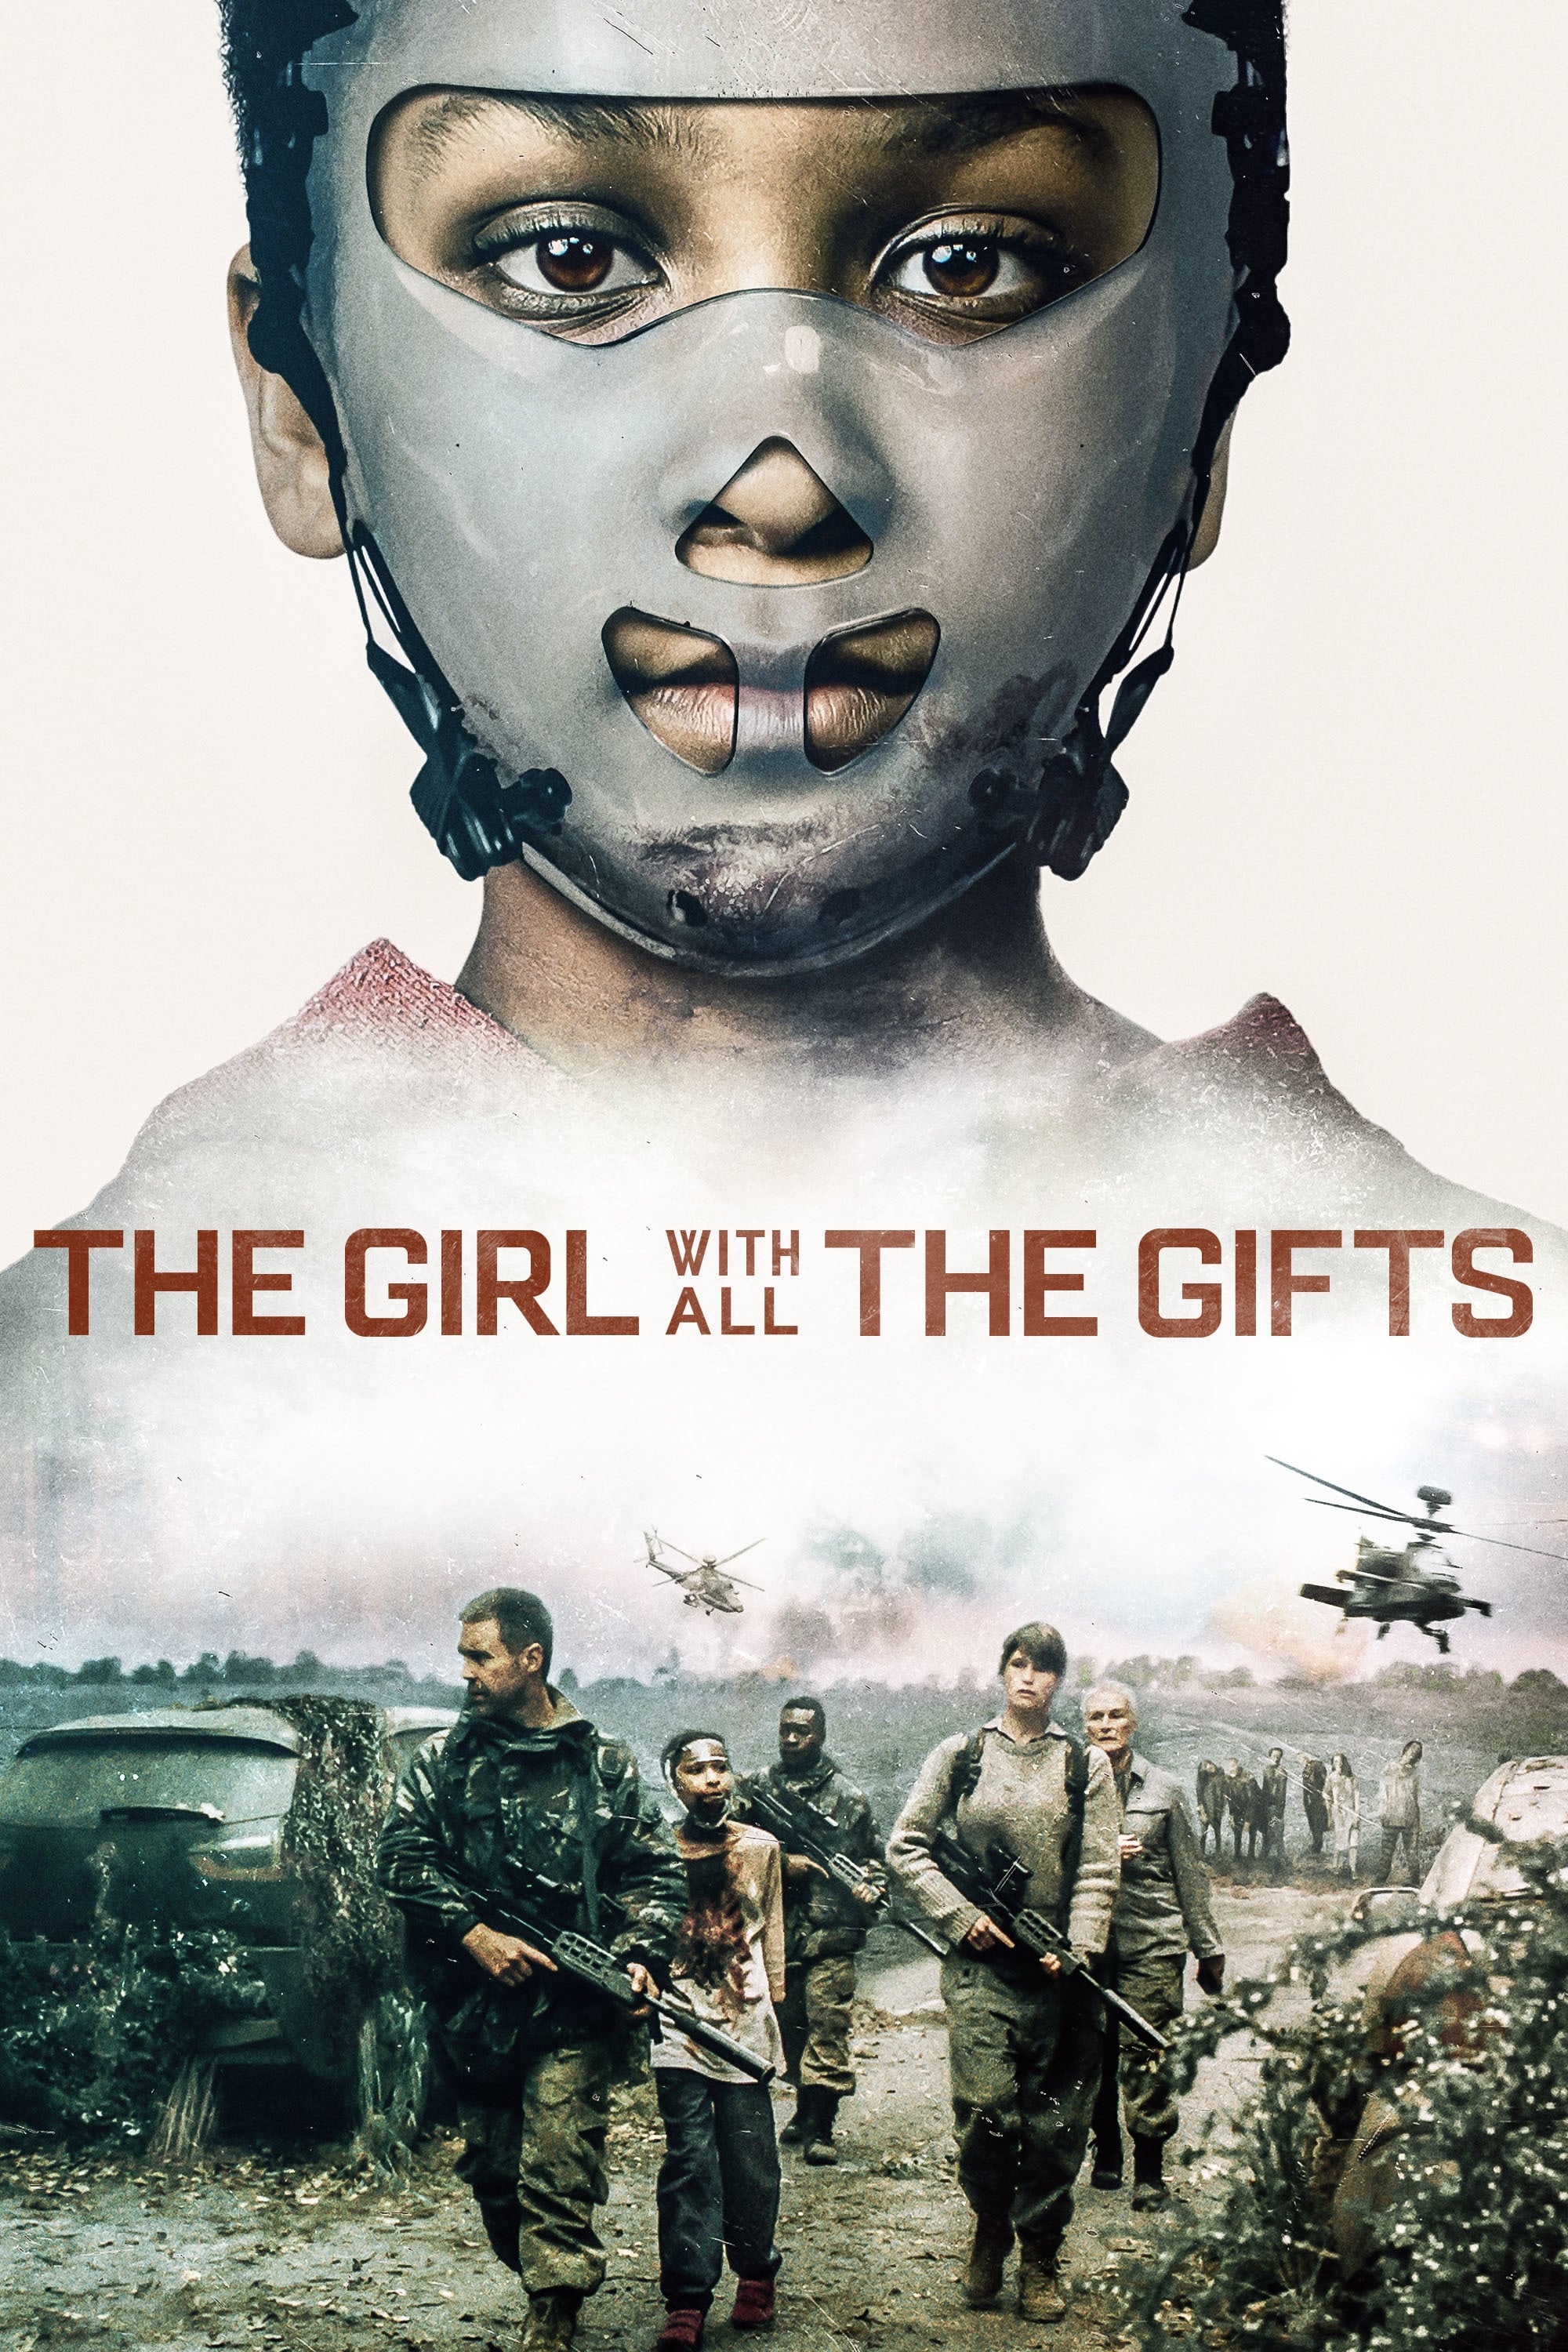 Melanie. The Girl With All the Gifts (2016)